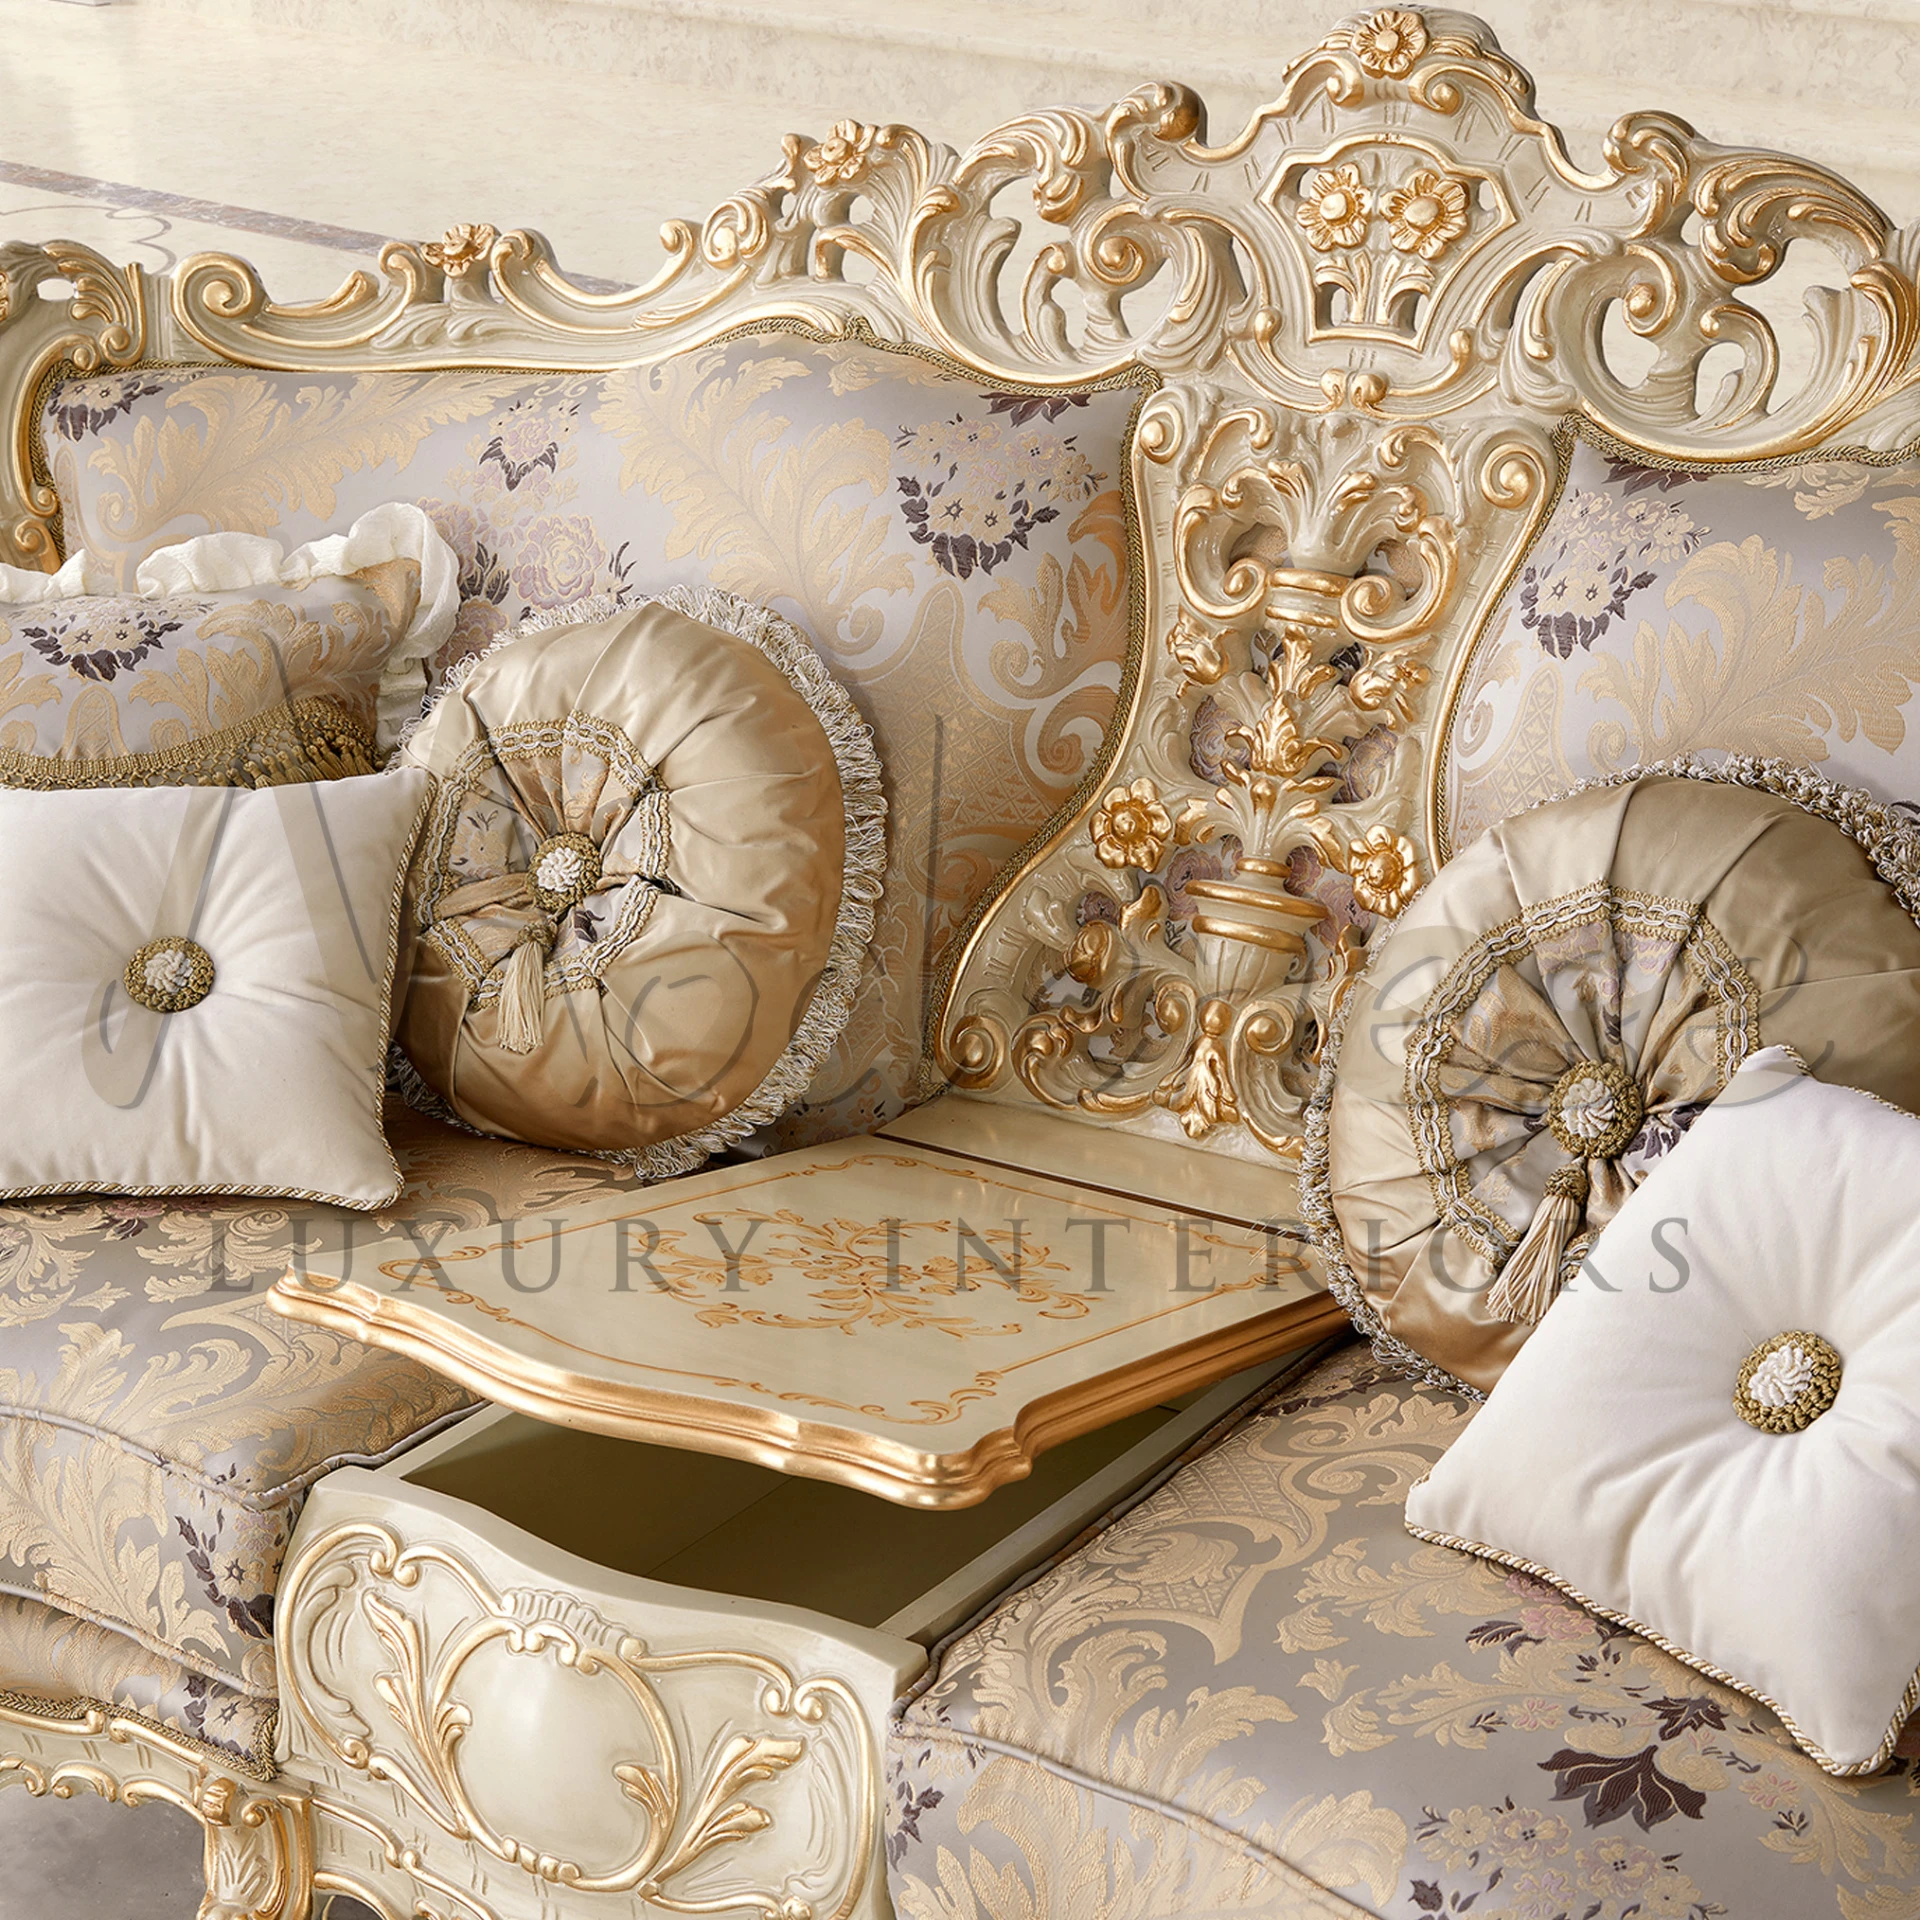 Unique 2-seater sofa with container, showcasing classic baroque style and Italian craftsmanship for elegant and practical home decor.